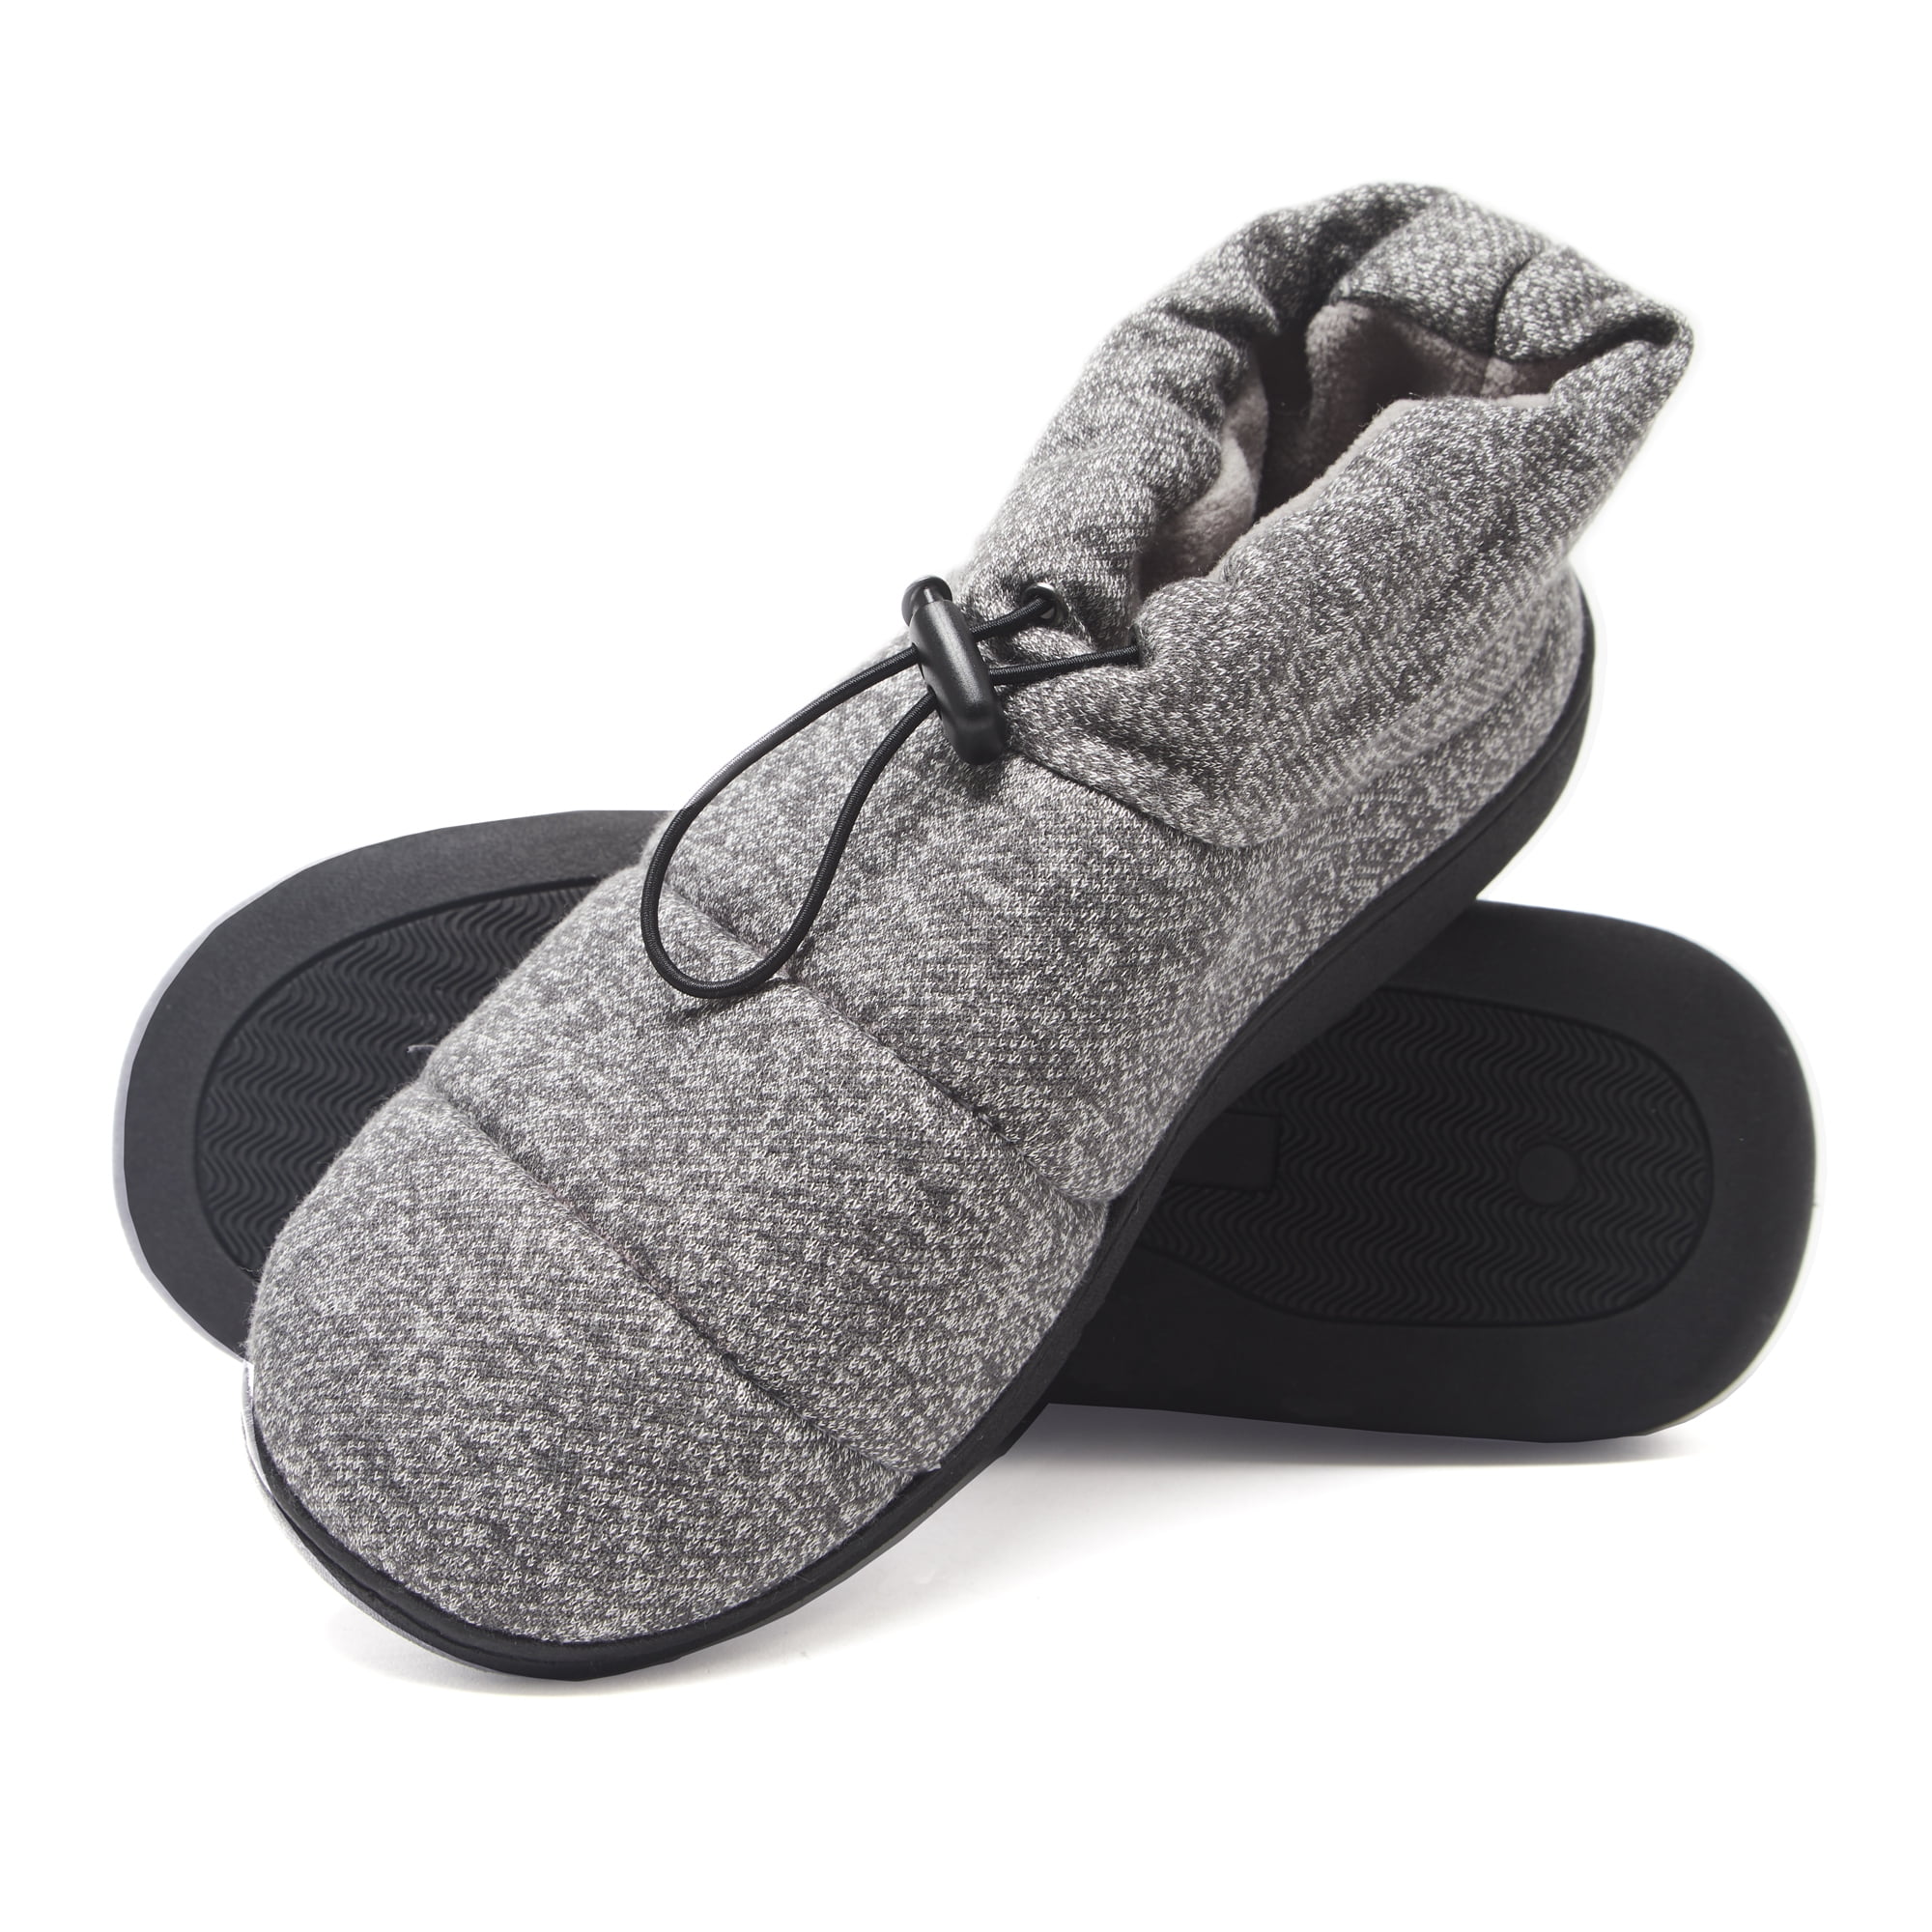 slipper boots outdoor sole